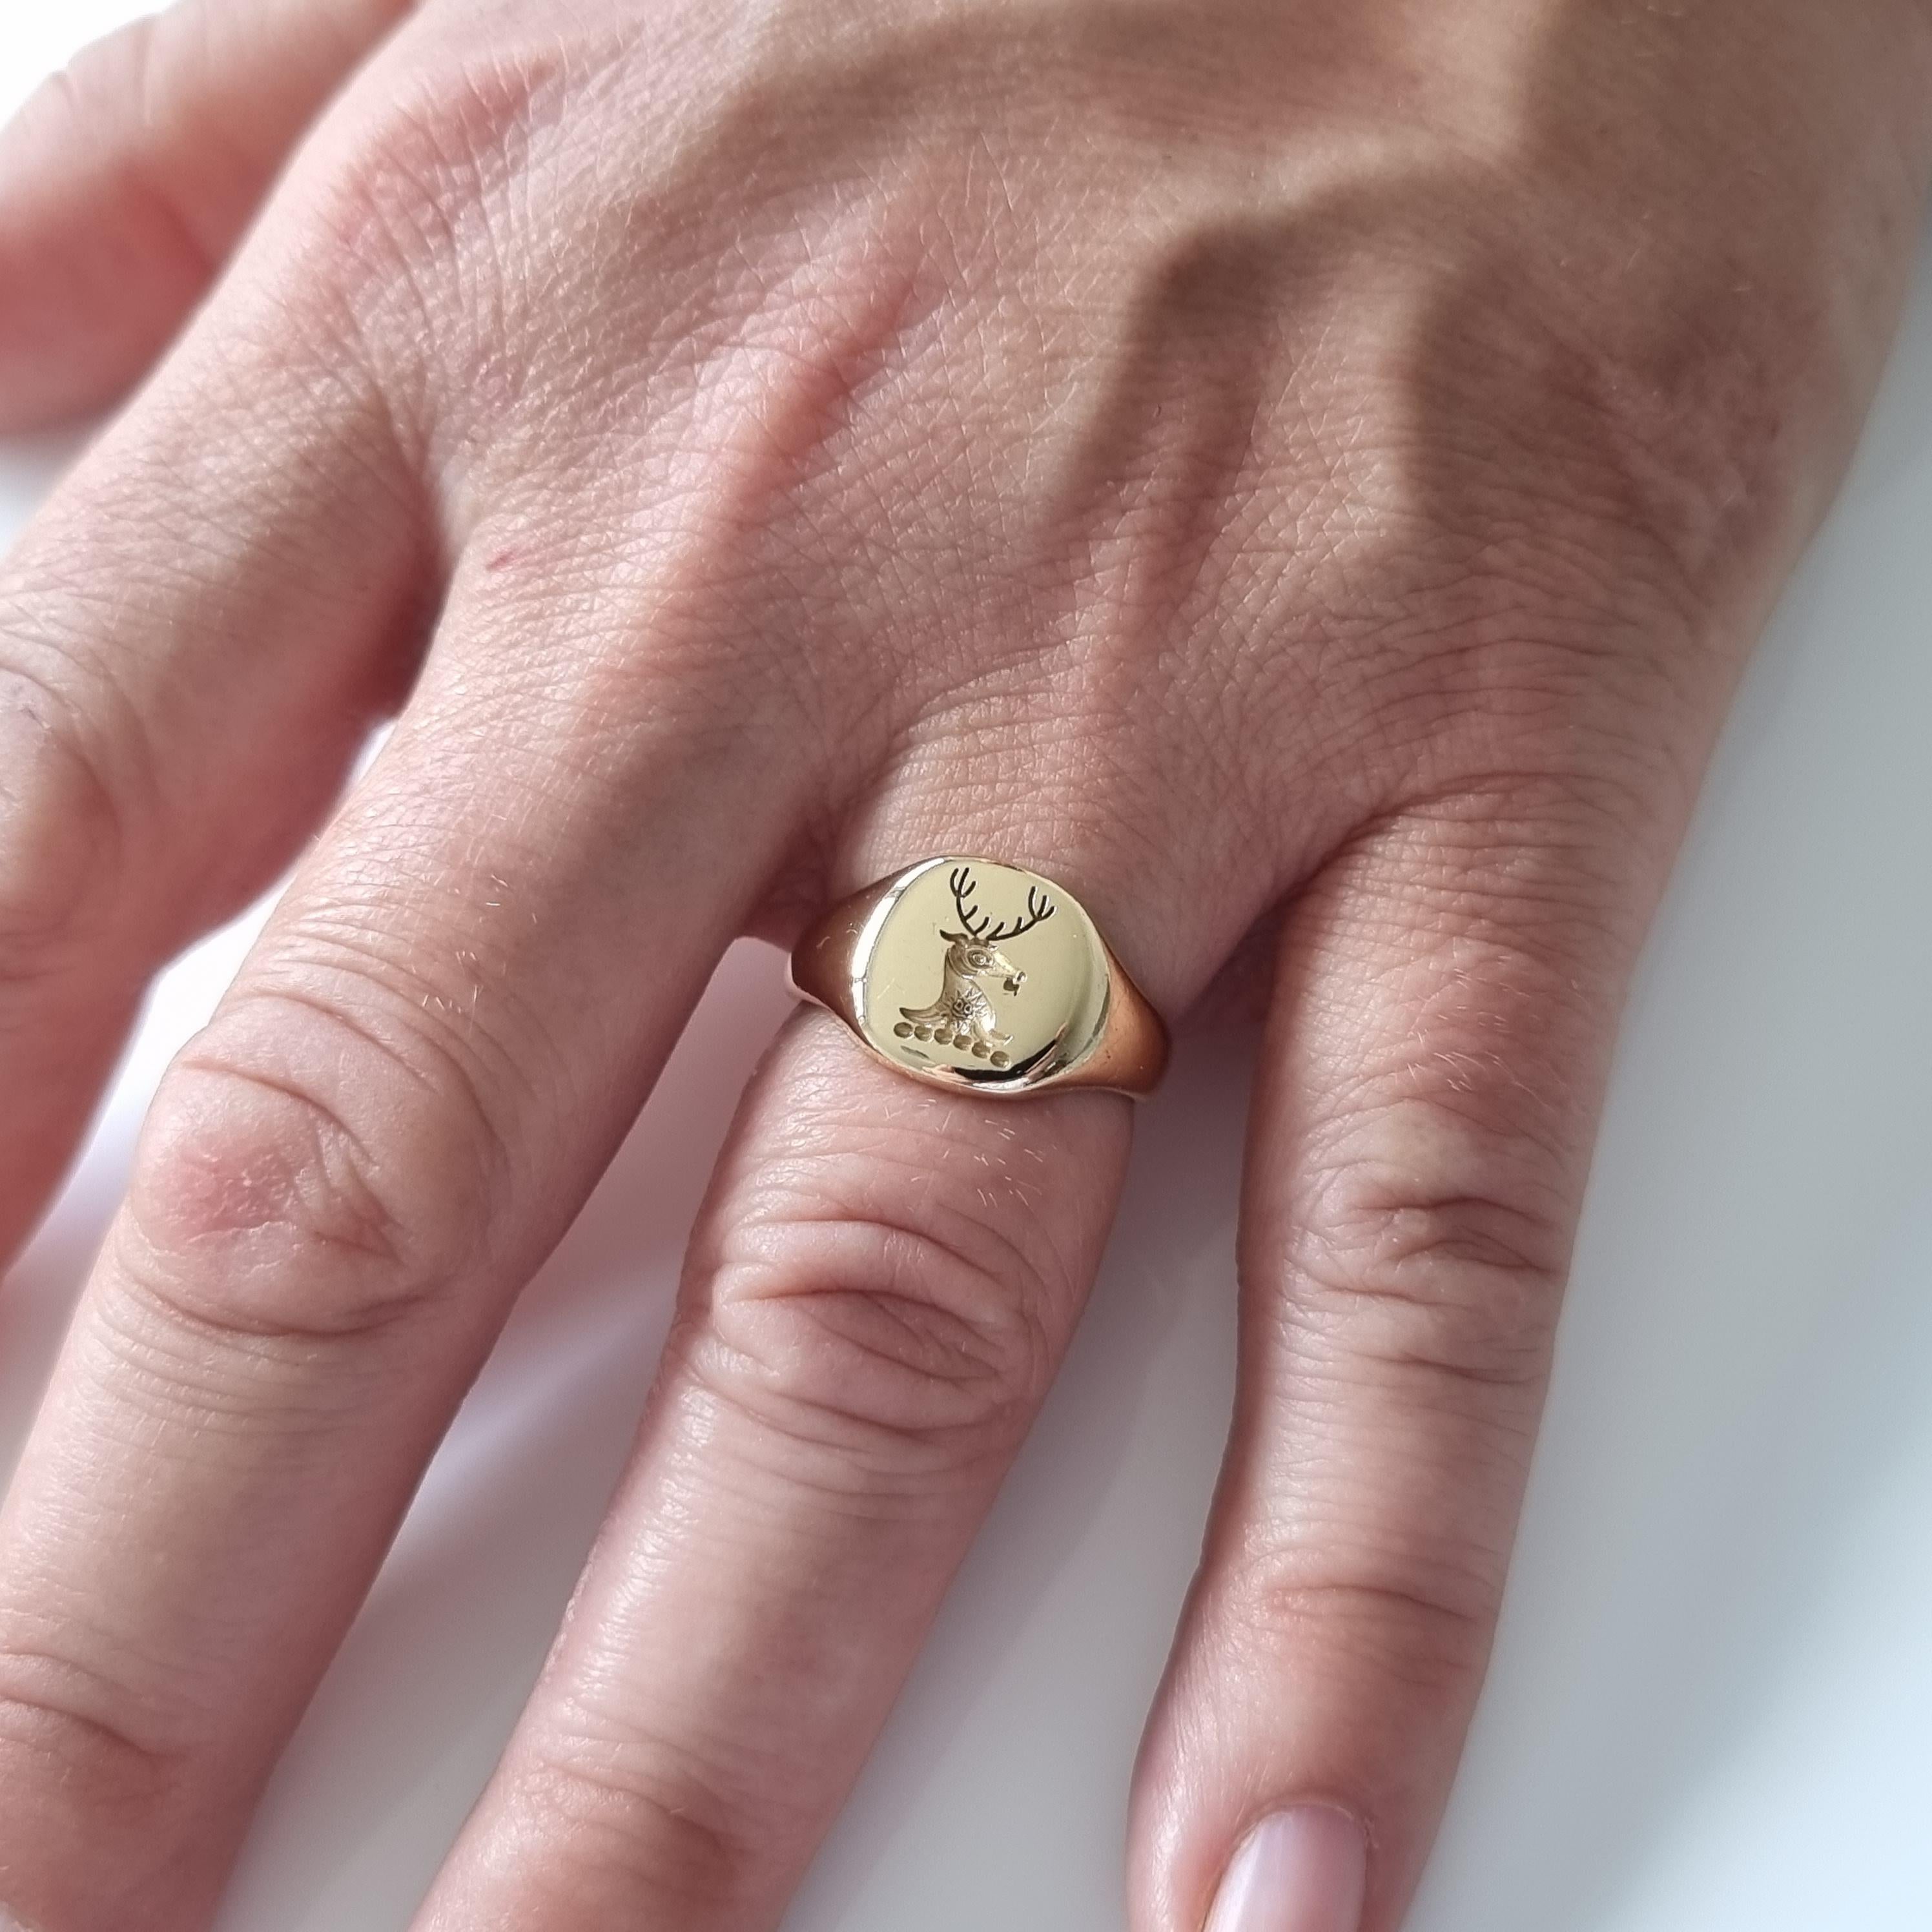 An 18ct yellow gold intaglio signet ring. The ring is engraved with a family crest.

The ring is hallmarked with Birmingham assay marks, date letter 'P' to denote 1964, and stamped '18' for 18 carat gold.

Period: - Mid 20th century.

Date: -